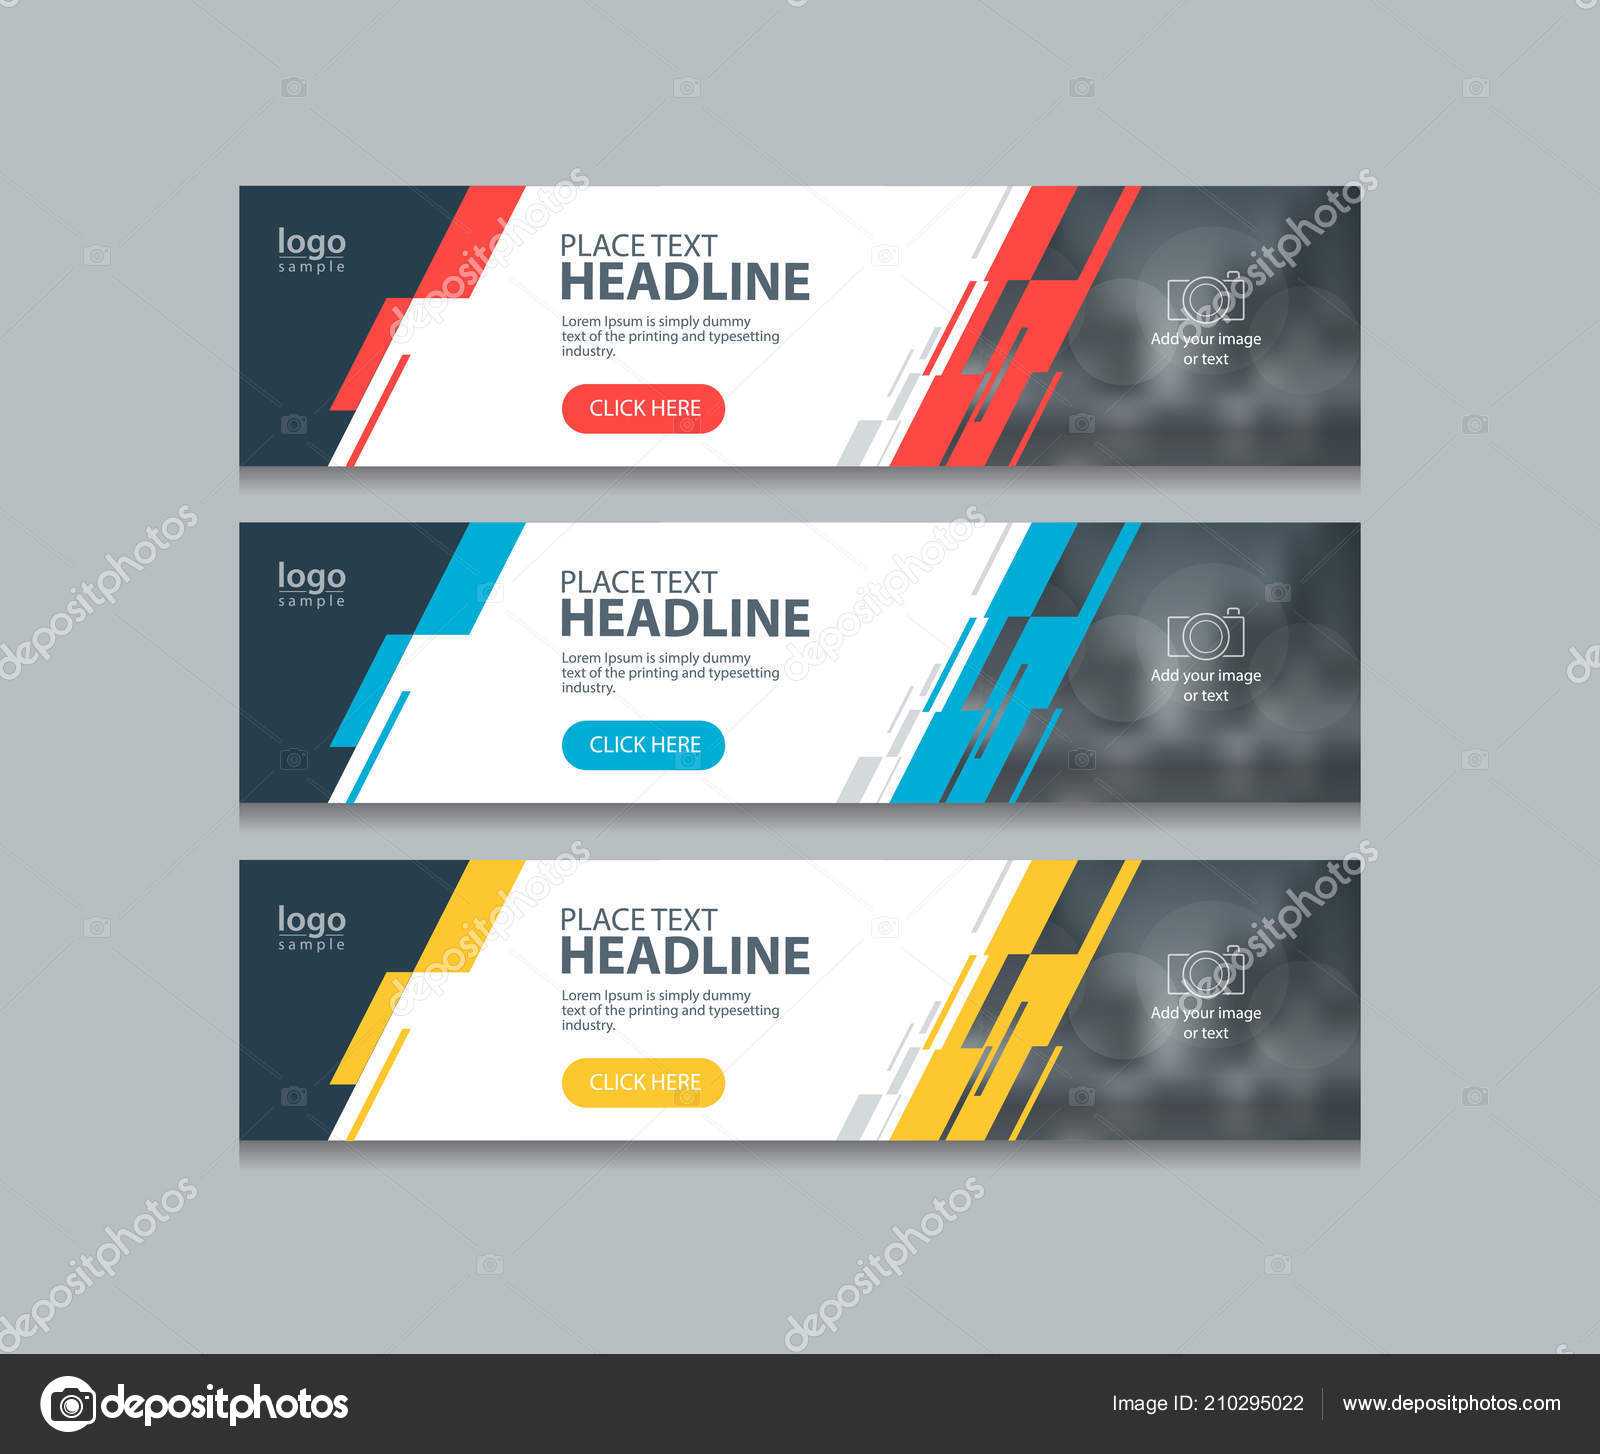 Abstract Horizontal Web Banner Design Template Backgrounds In Website Banner Design Templates